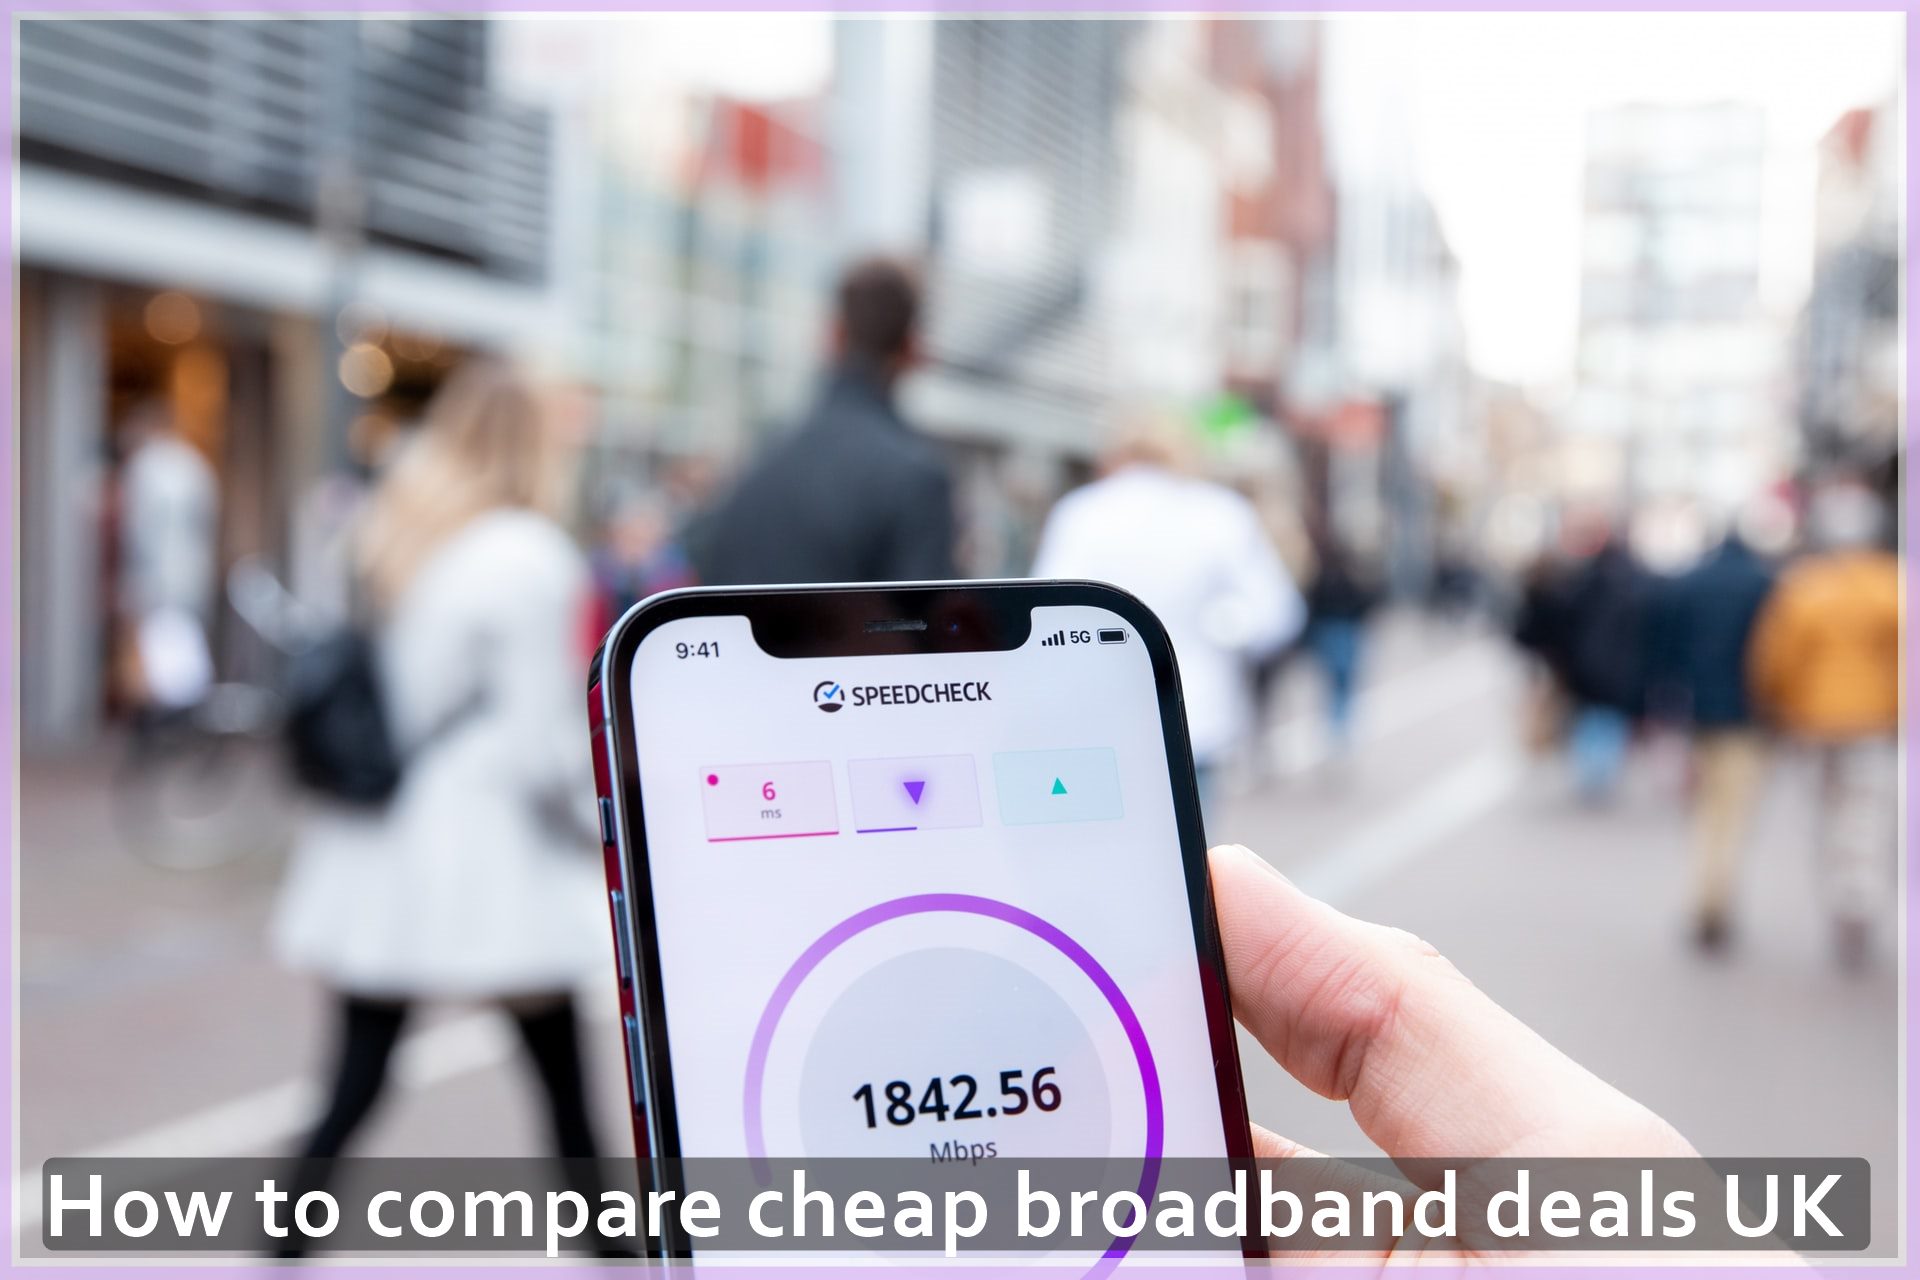 How to compare cheap broadband deals UK